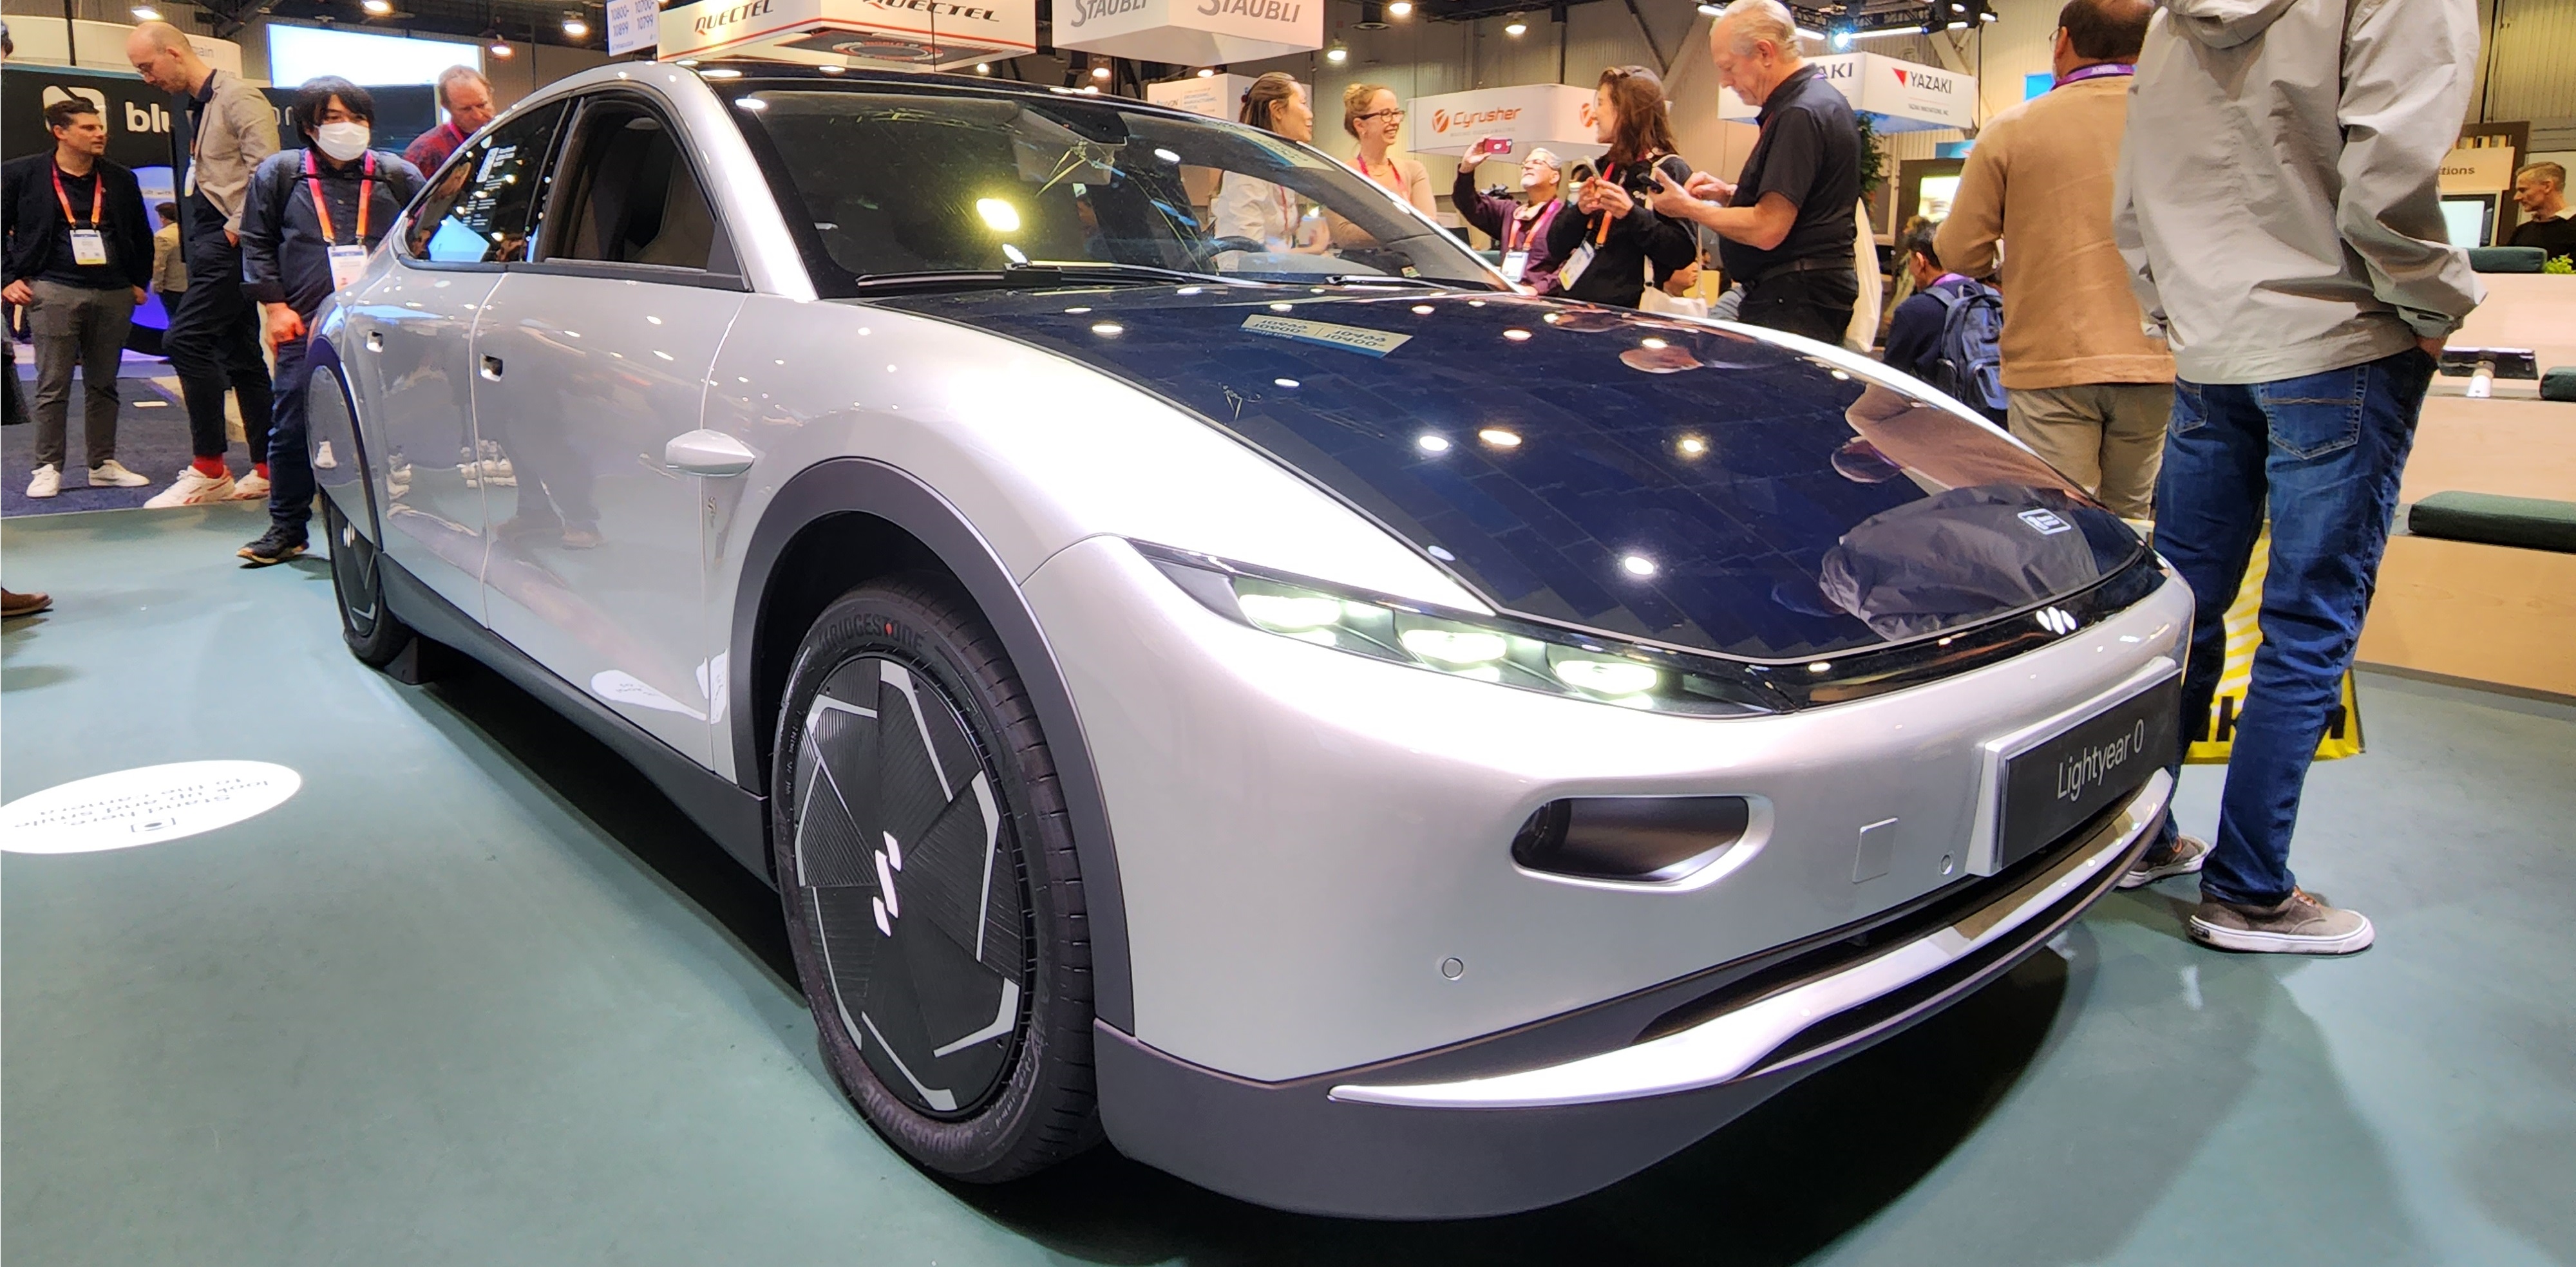 Lightyear reveals new 40,000 solarpowered car, claims it will begin